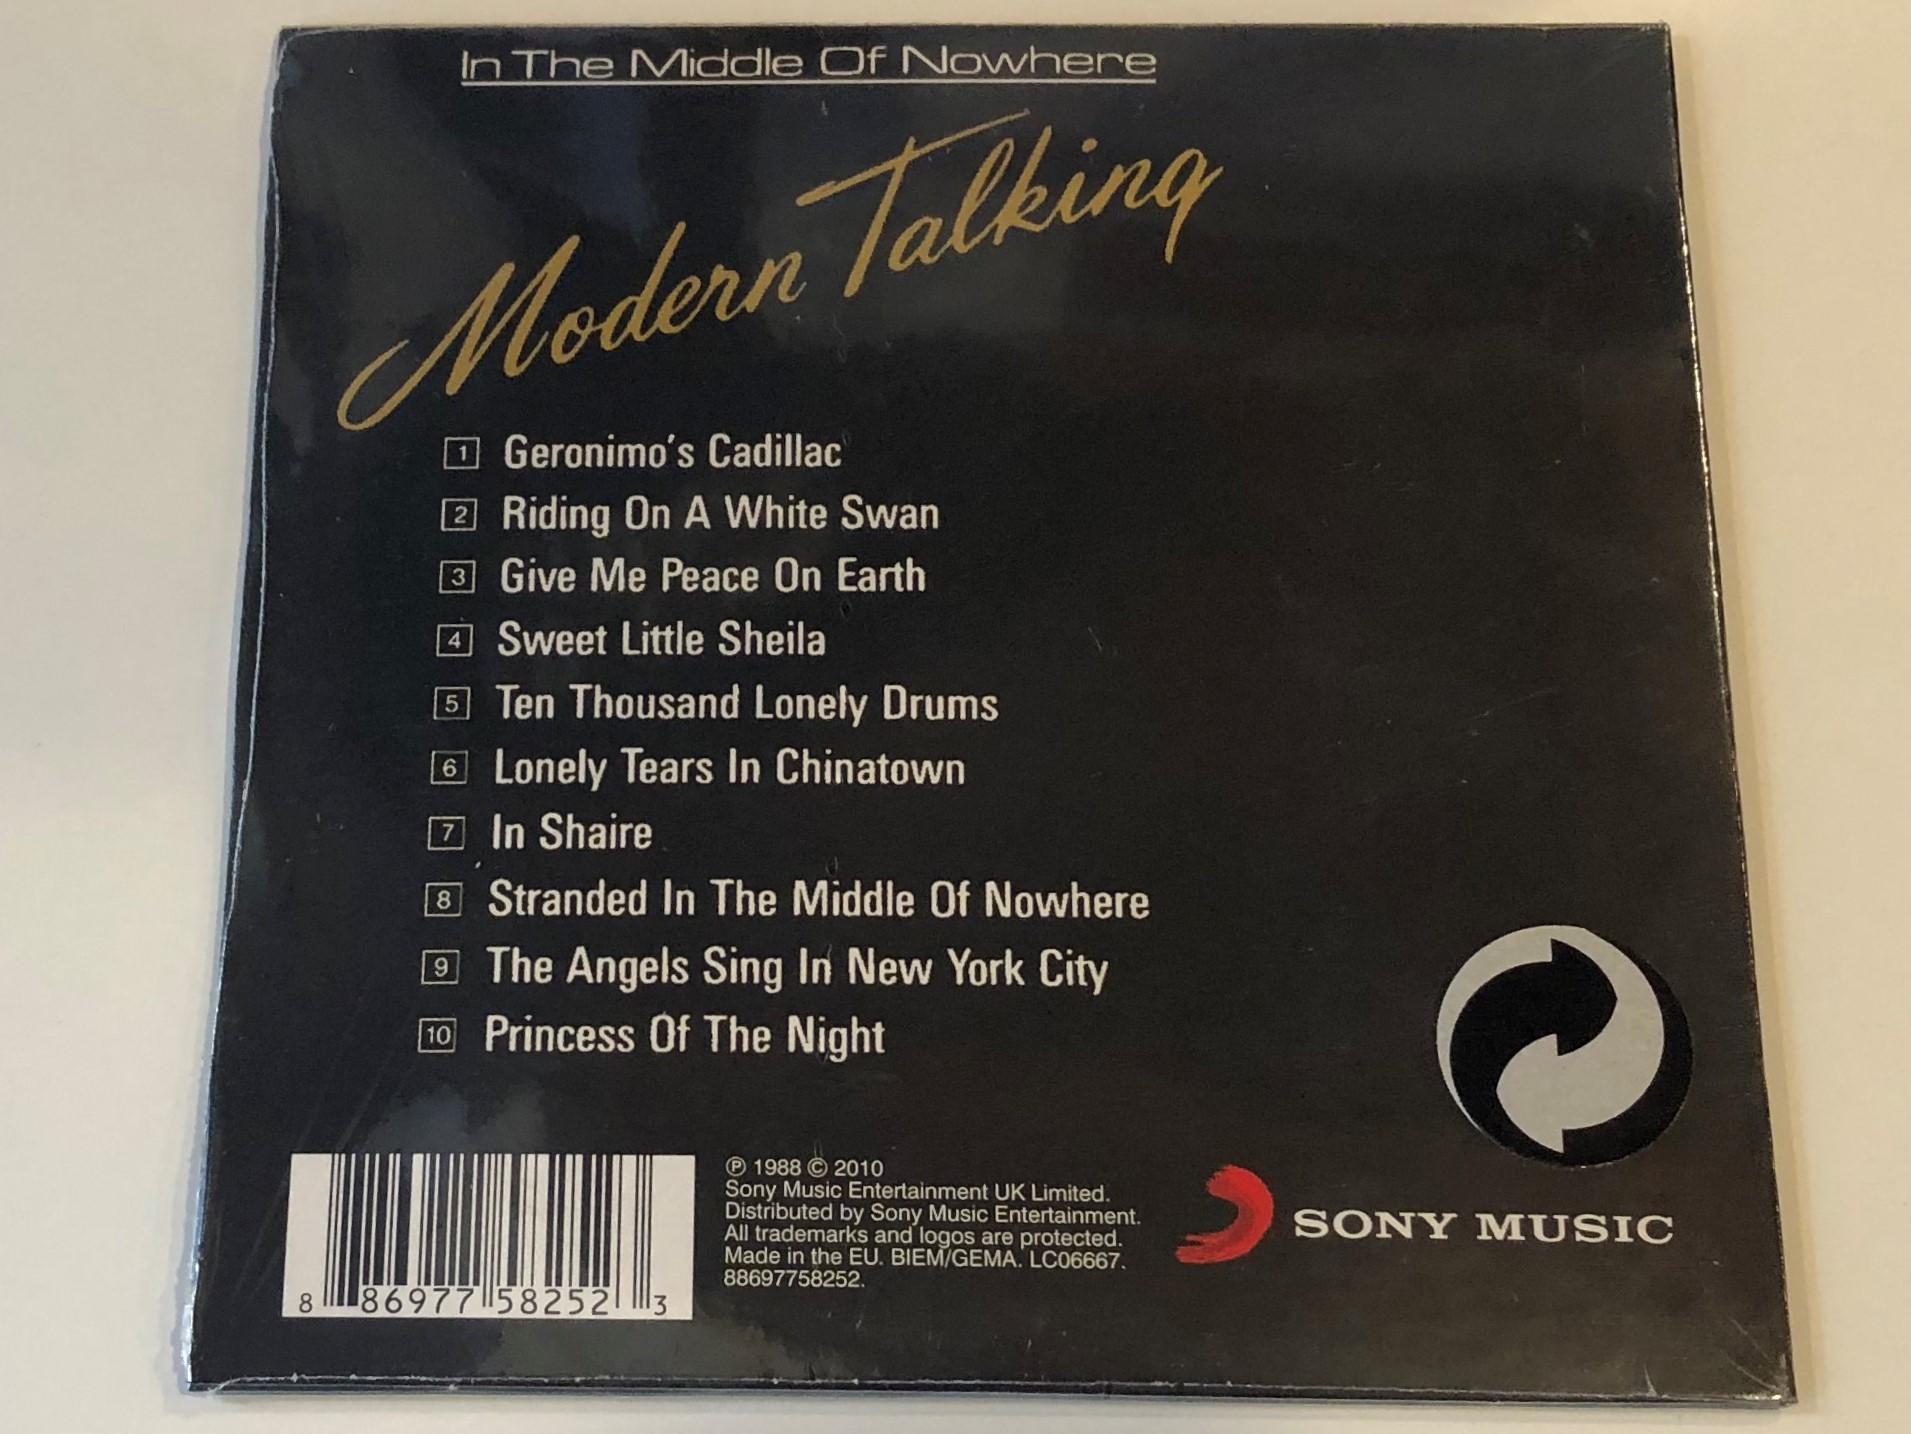 in-the-middle-of-nowhere-modern-talking-the-4th-album-sony-music-audio-cd-2010-88697758252-2-.jpg